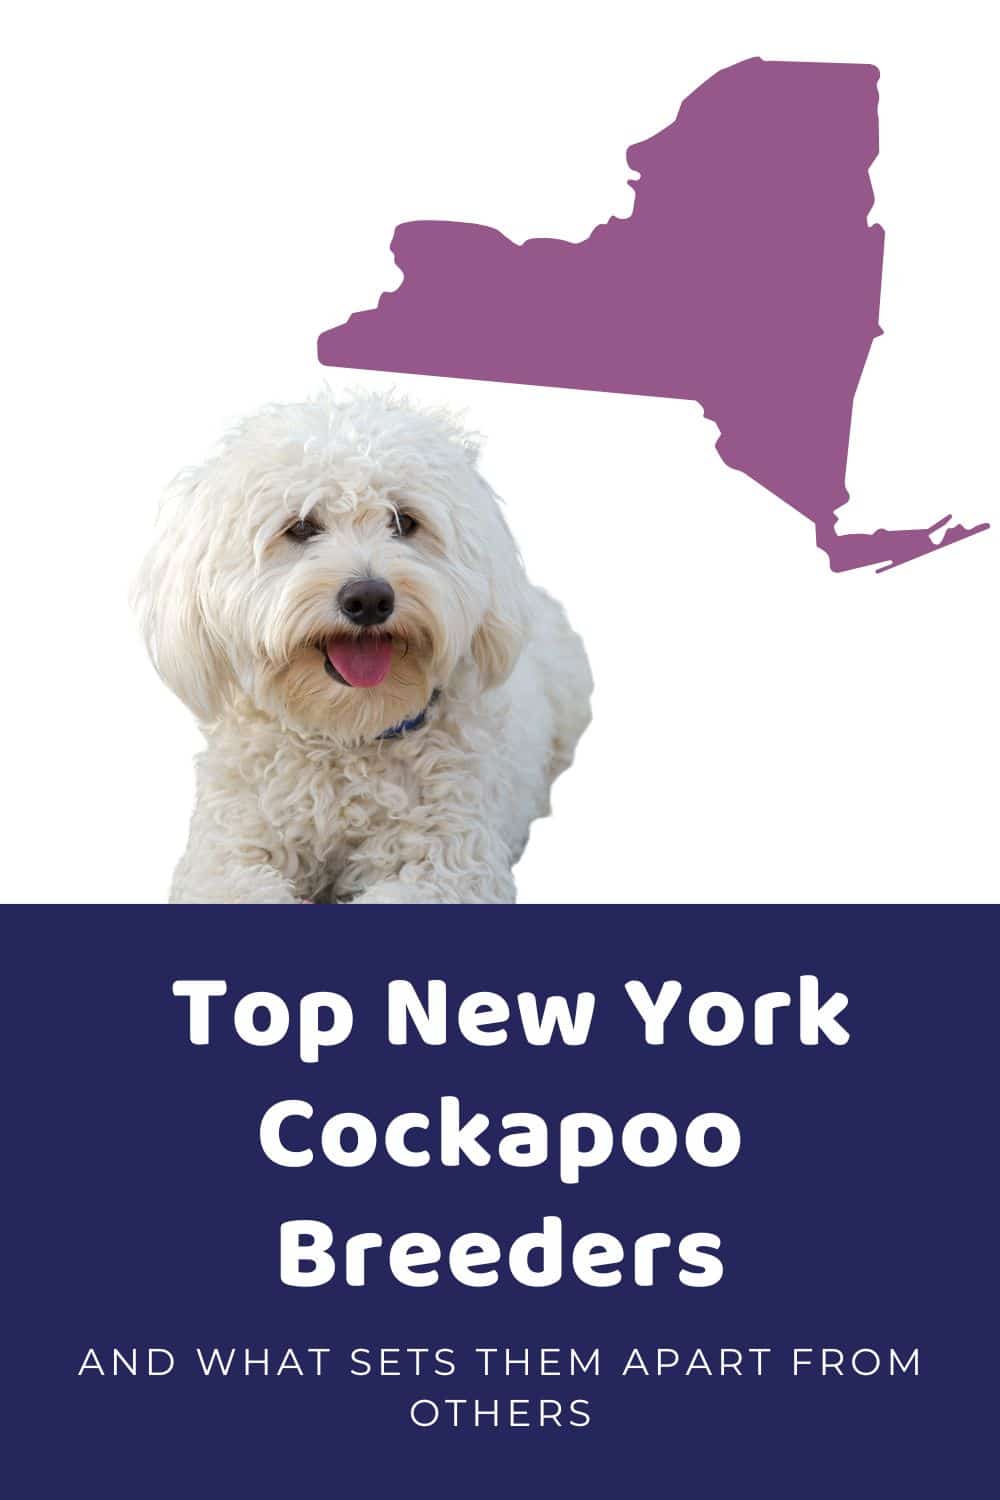 List Of Ethical Cockapoo Breeders In New York